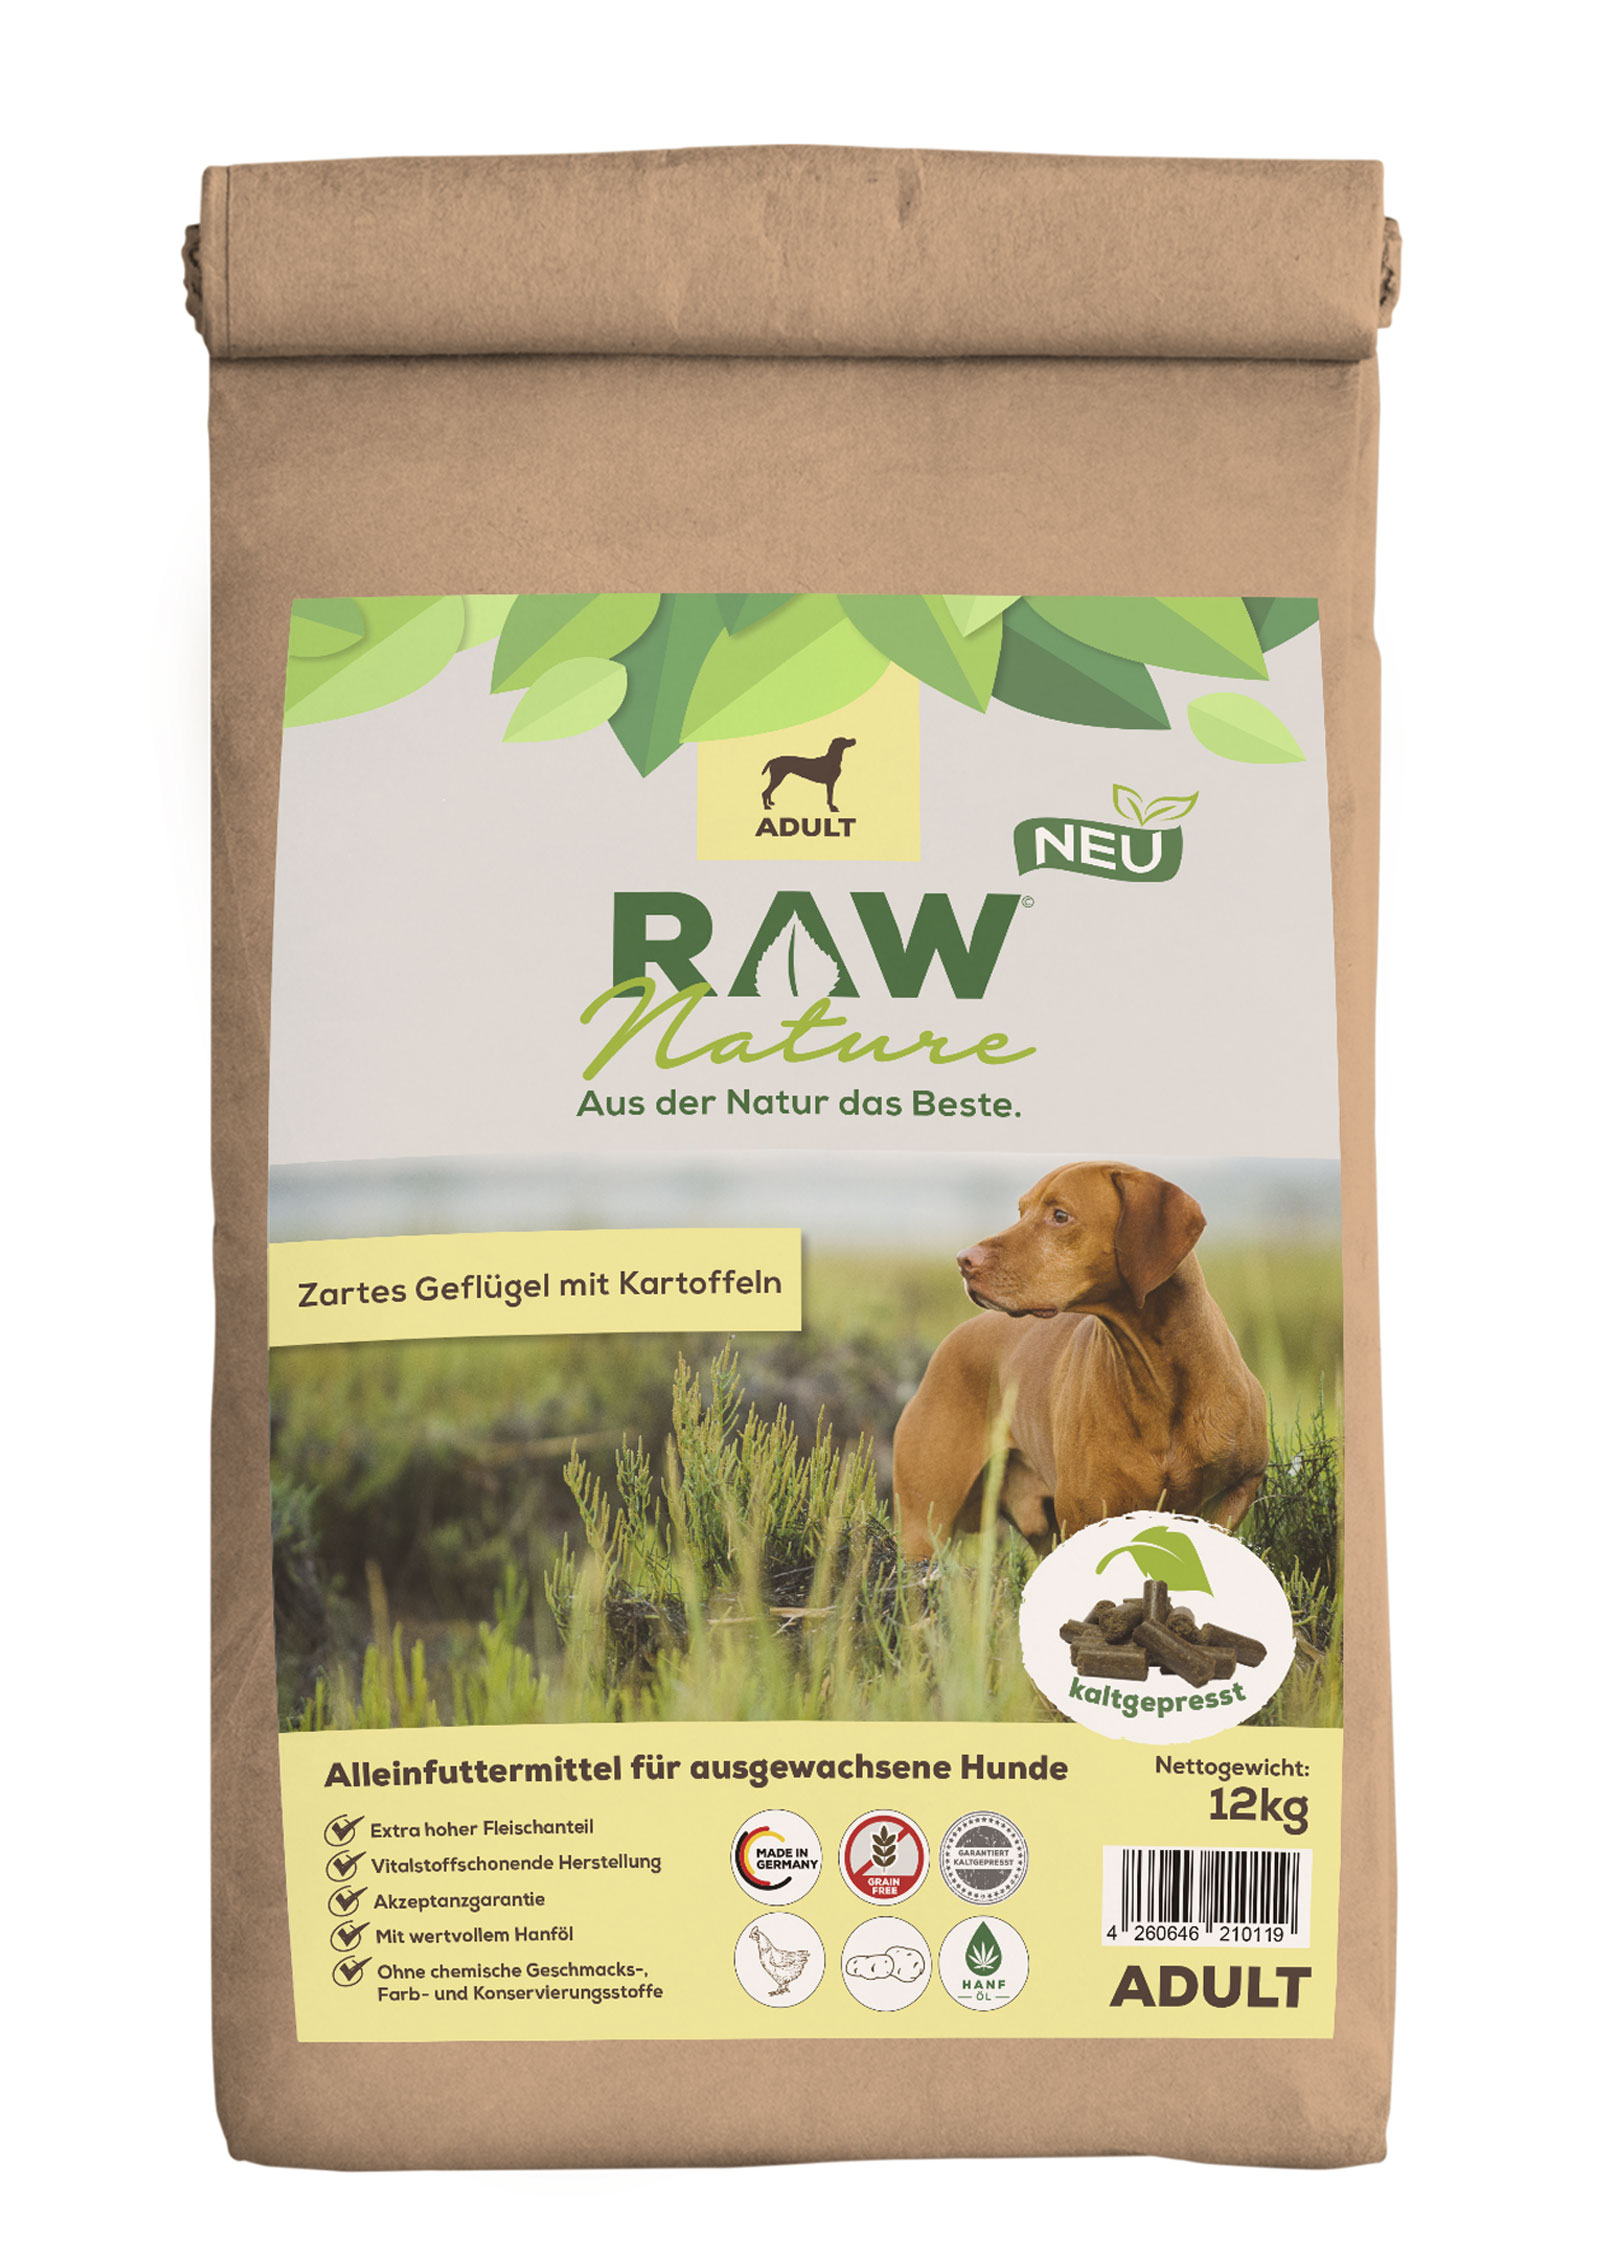 RAW-Nature-Adult-12kg-schmal